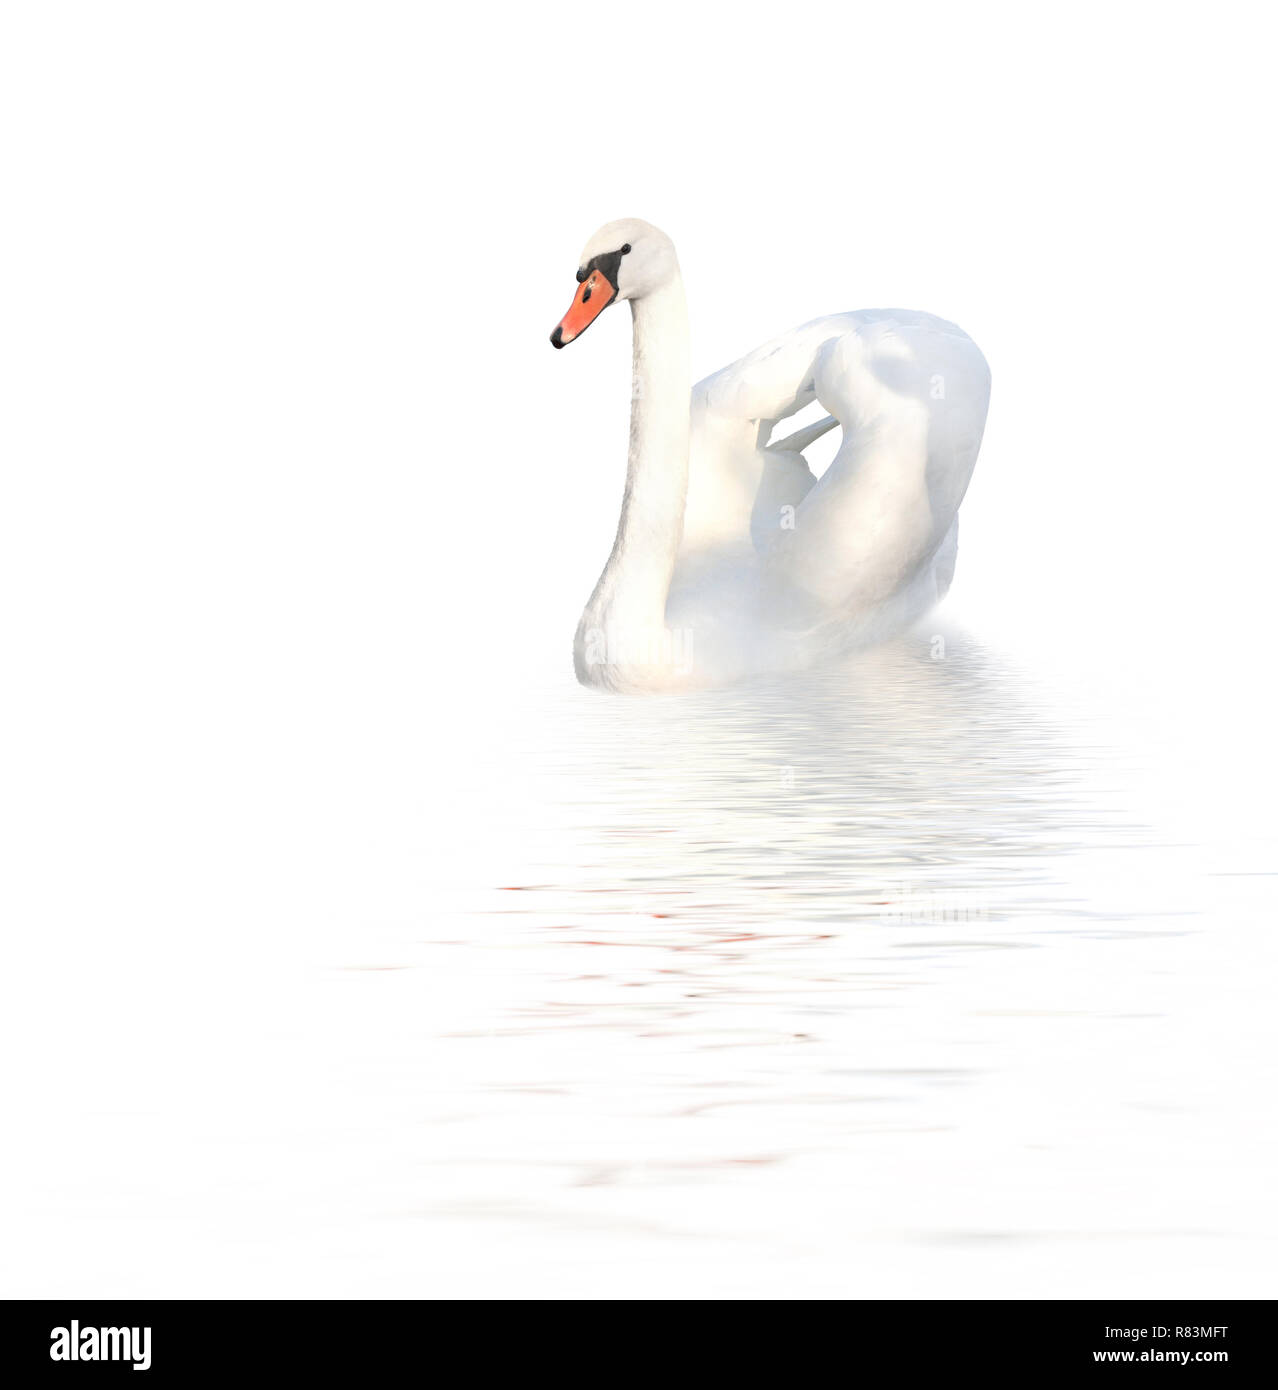 Mute swan. Isolated on white background Stock Photo